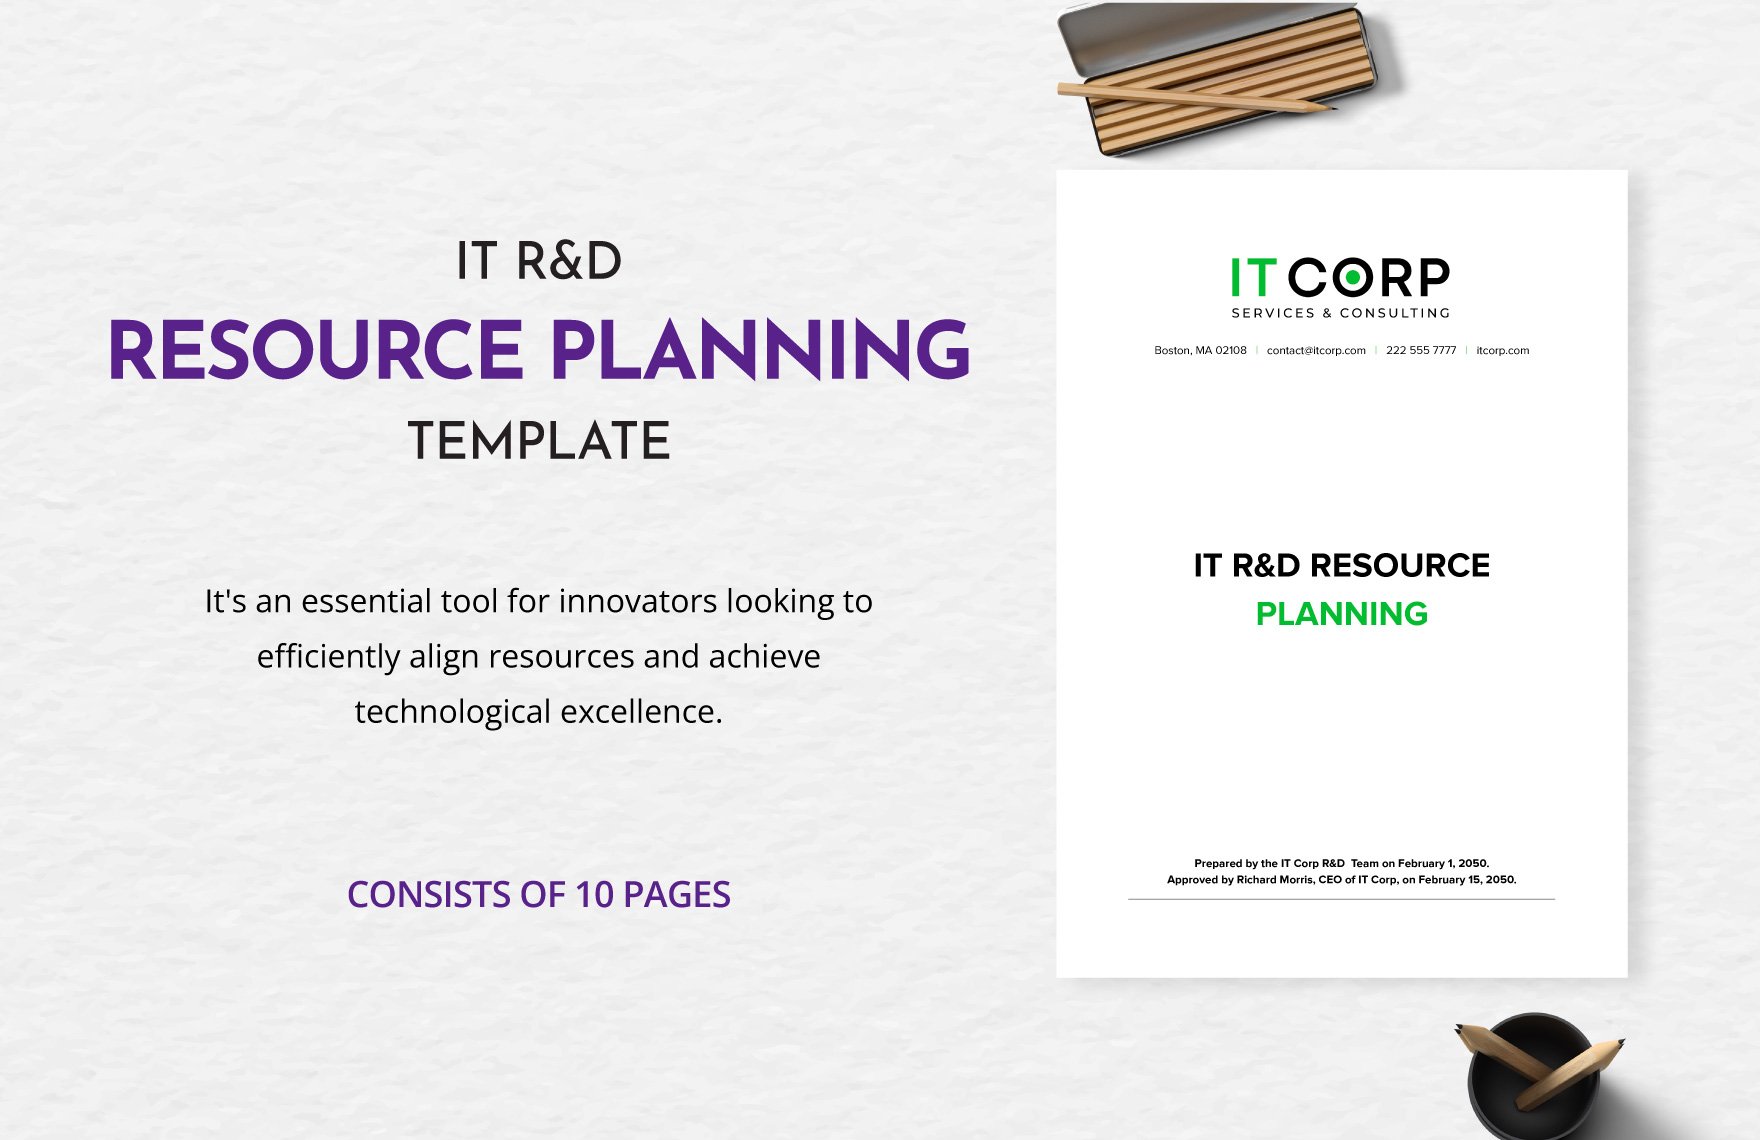 IT R&D Resource Planning Template in Word, Google Docs, PDF